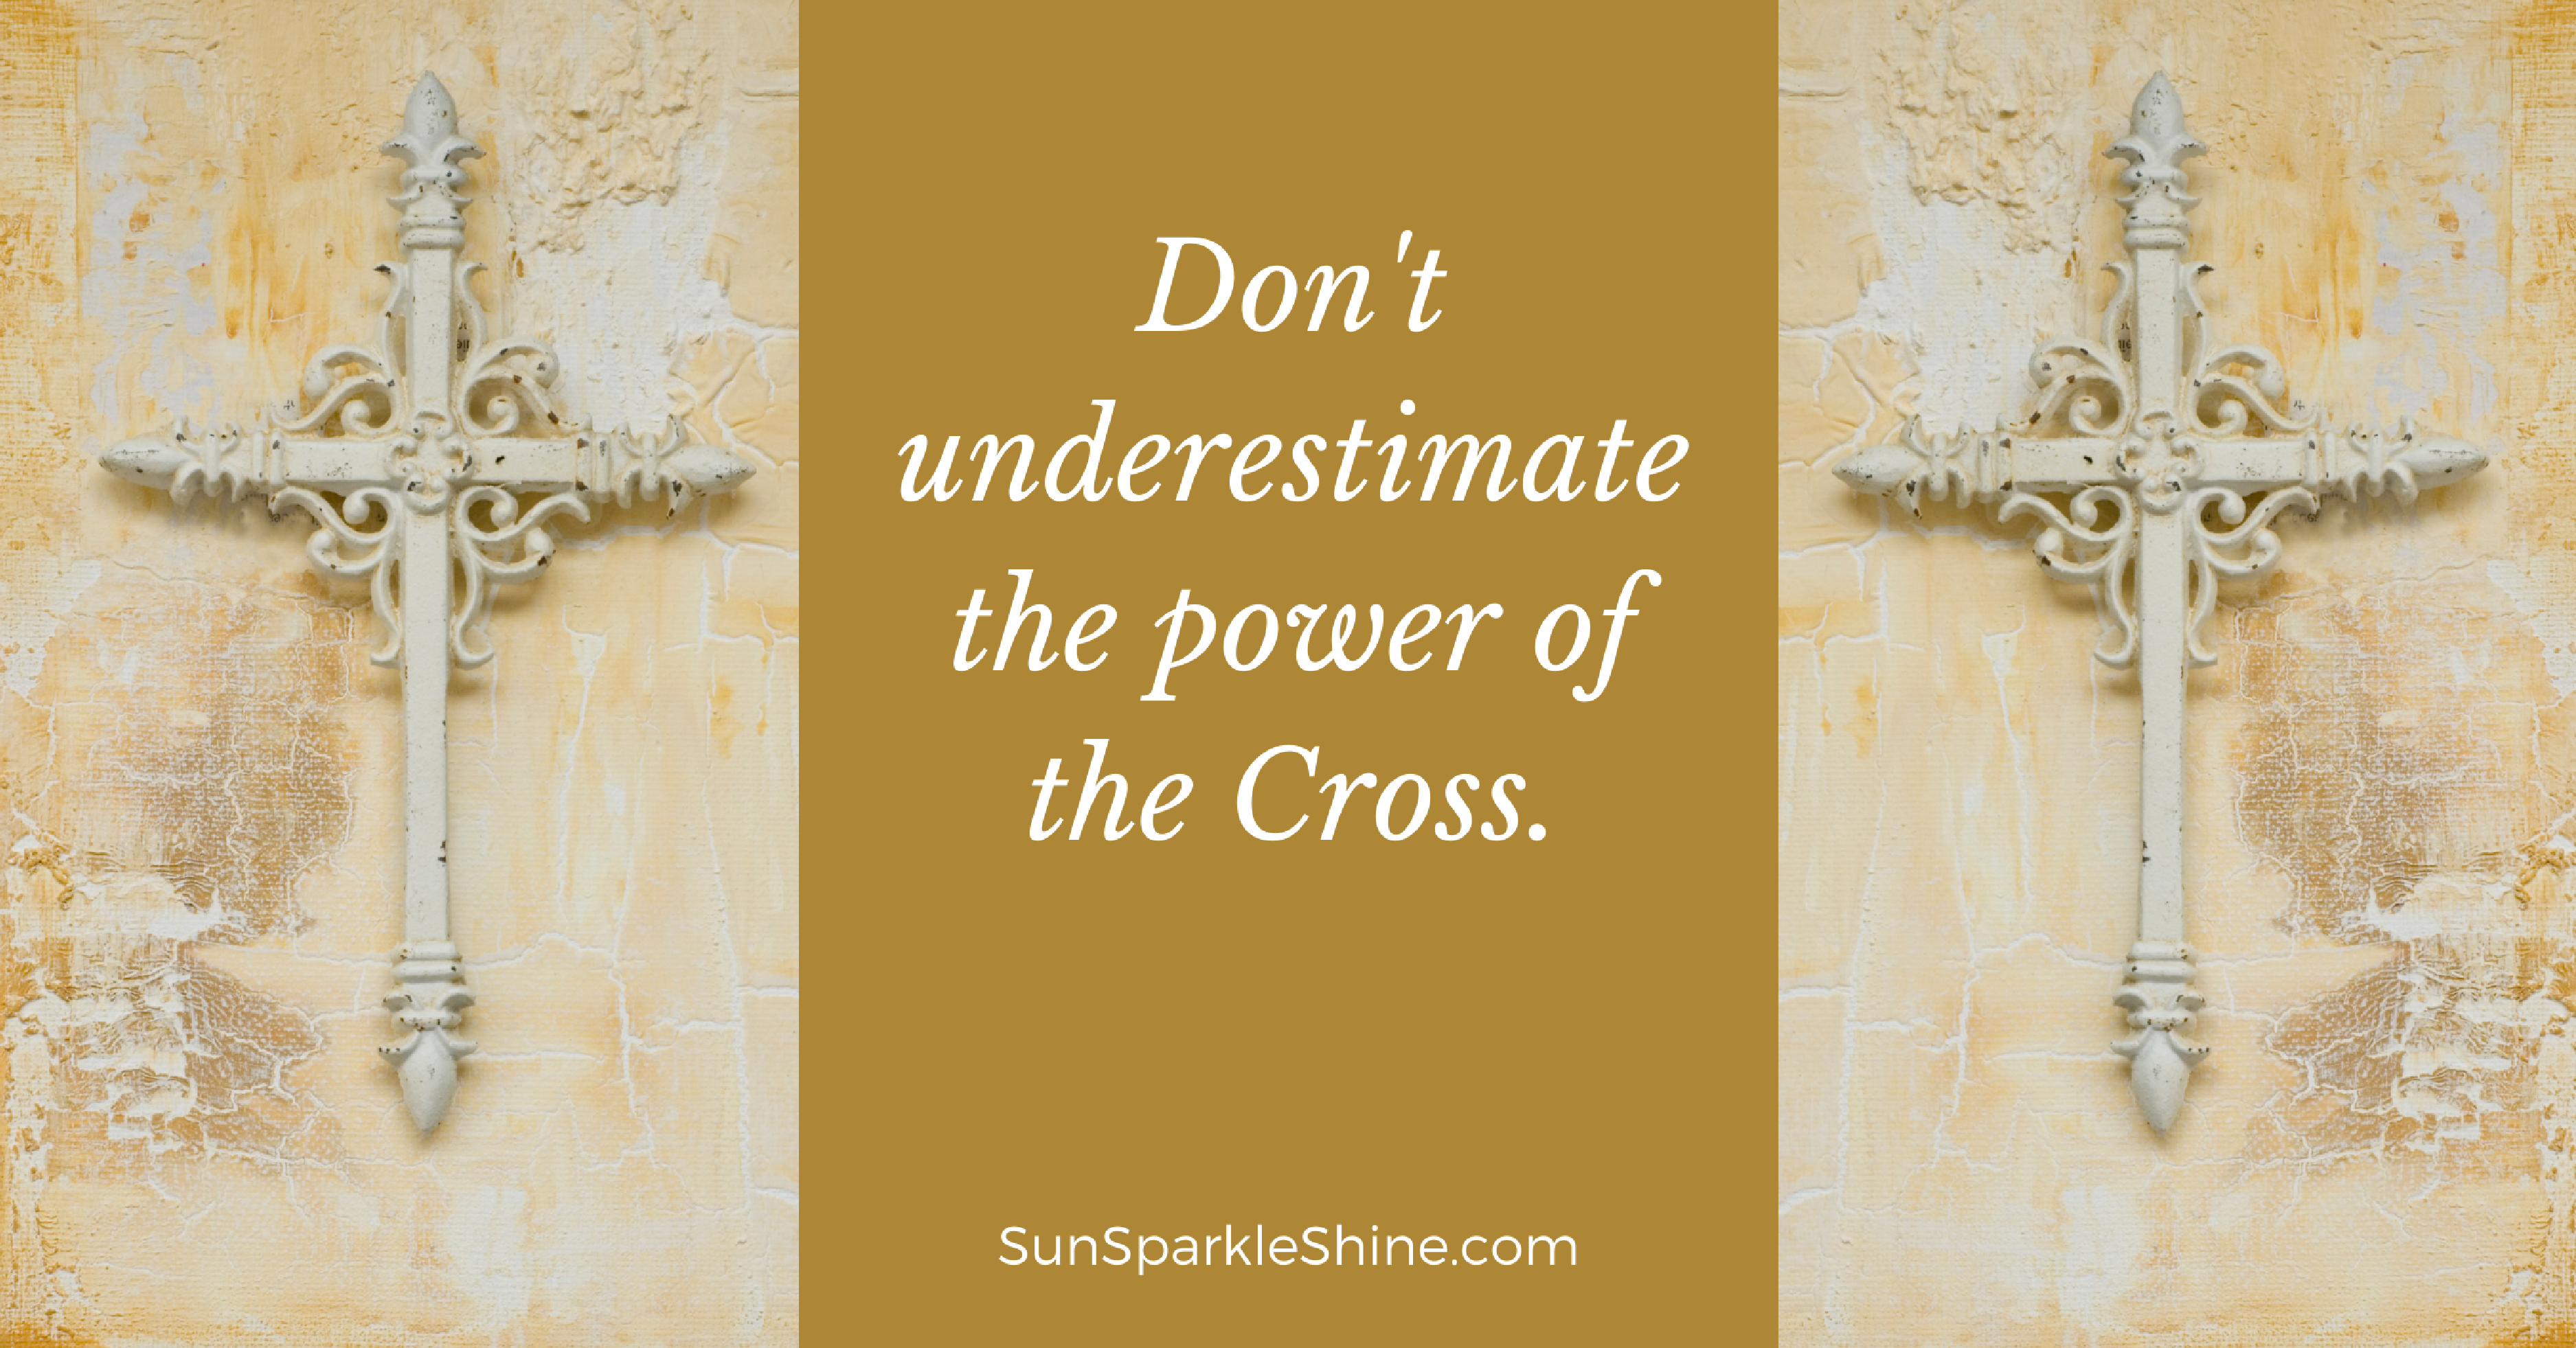 The Cross of Christ is a beautiful image of God’s love for us but is it just a symbol? Or does the Cross have the power to transform our lives? To find out more, read this devotional with prompts from the old hymn When I Survey the Wondrous Cross on SunSparkleShine.com.